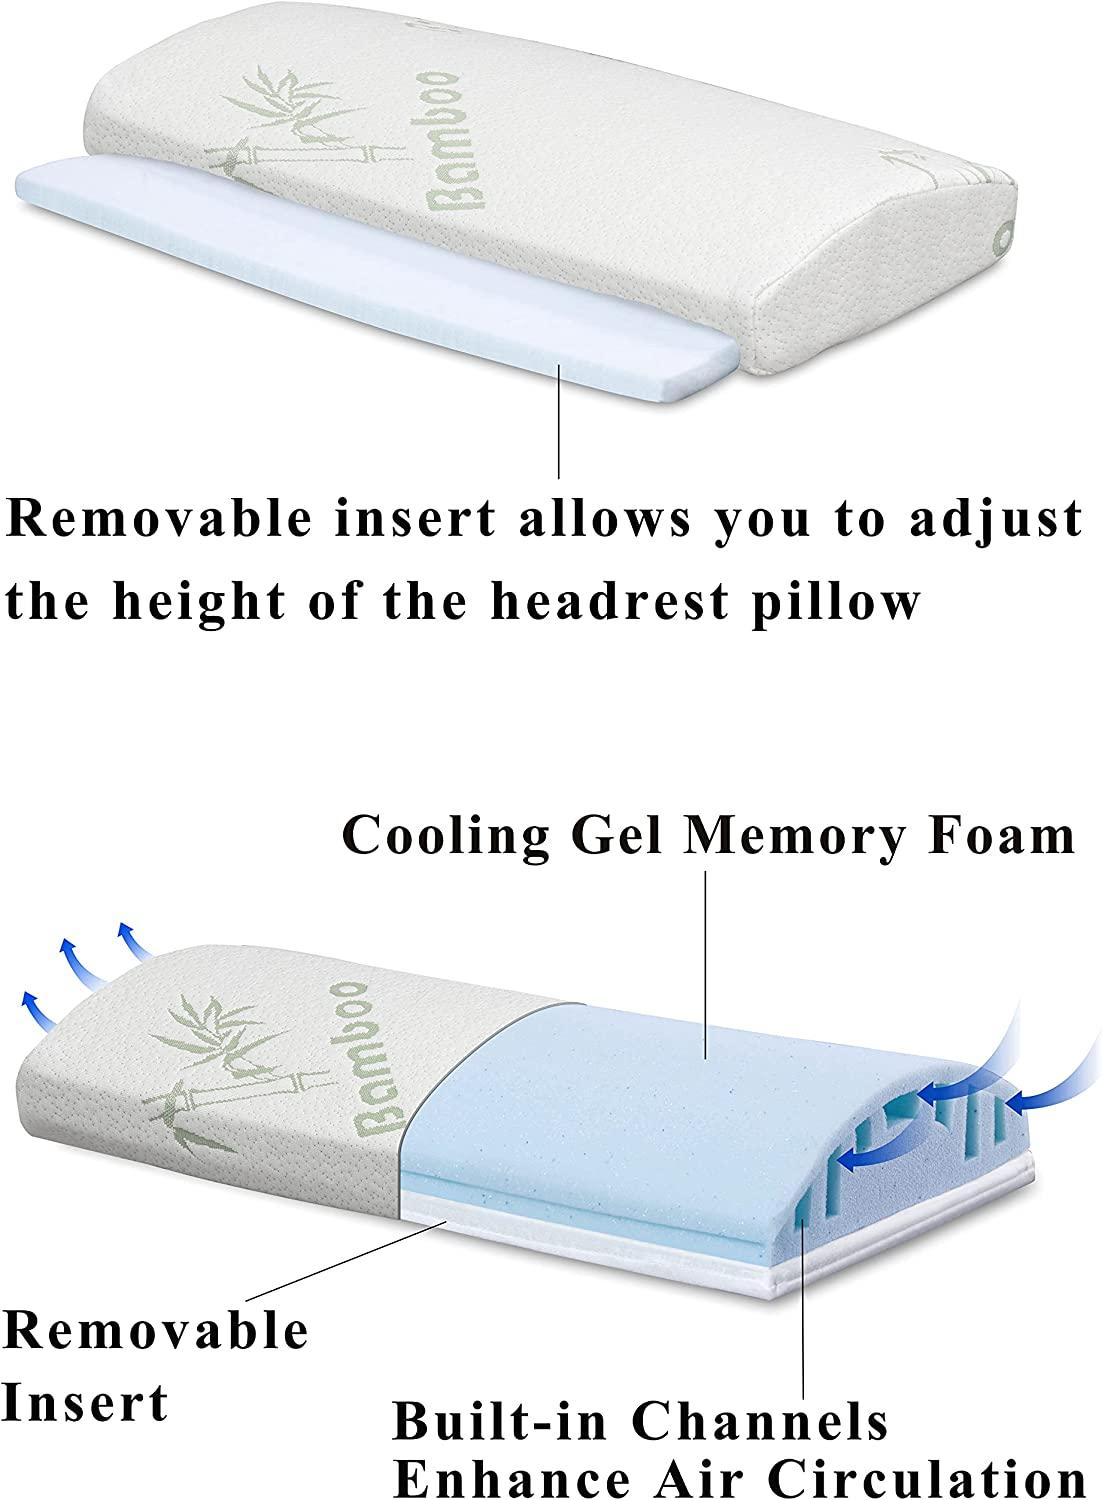 10 Cooling Bed Wedge Pillow 24 inch Wide Incline Support Cushion